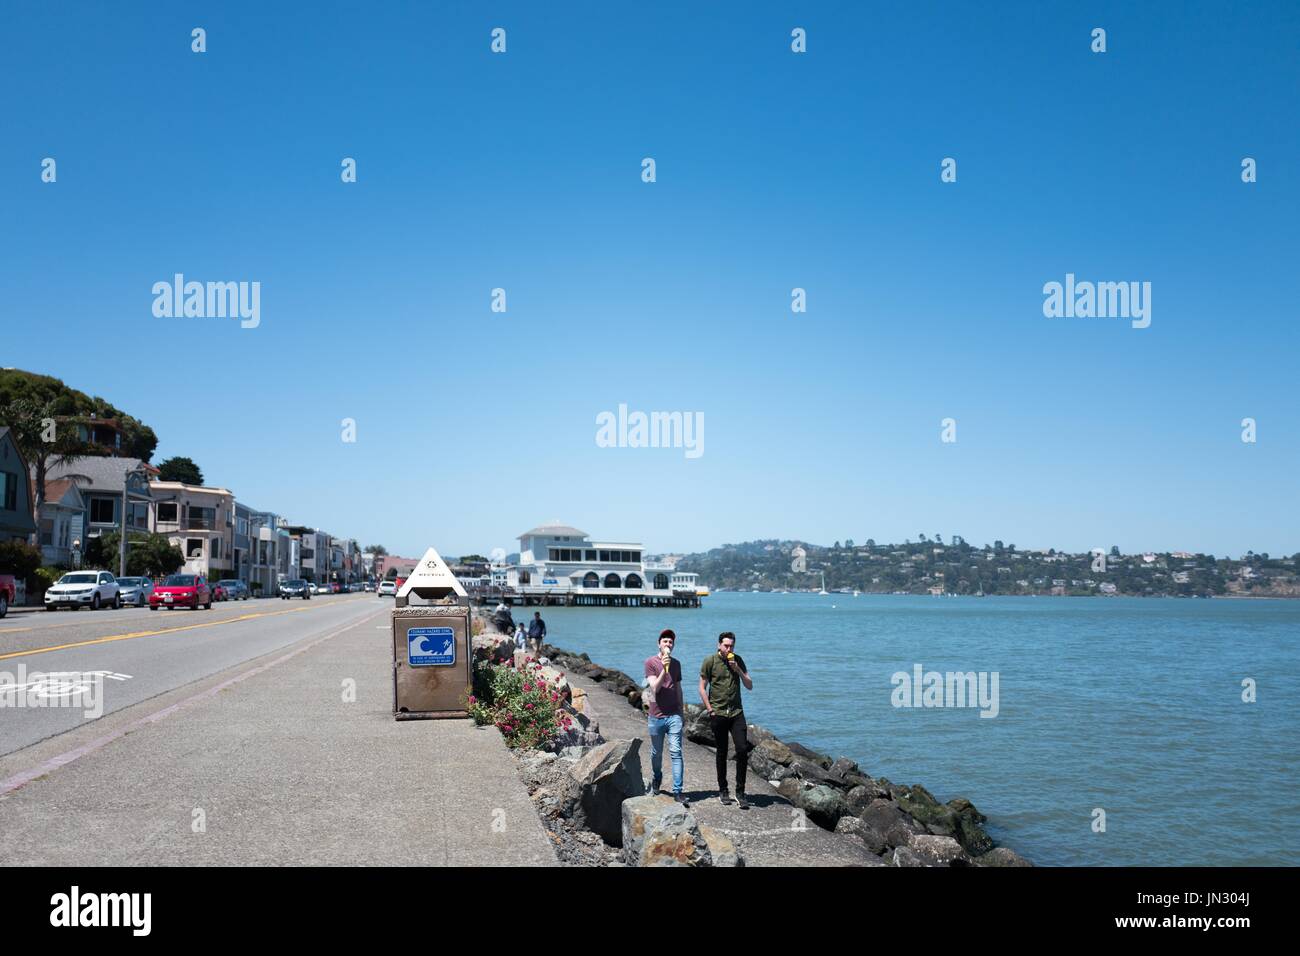 Two men walk along a seawall and eat ice cream cones on Bridgeway Road in the San Francisco Bay Area town of Sausalito, California, June 29, 2017. Stock Photo